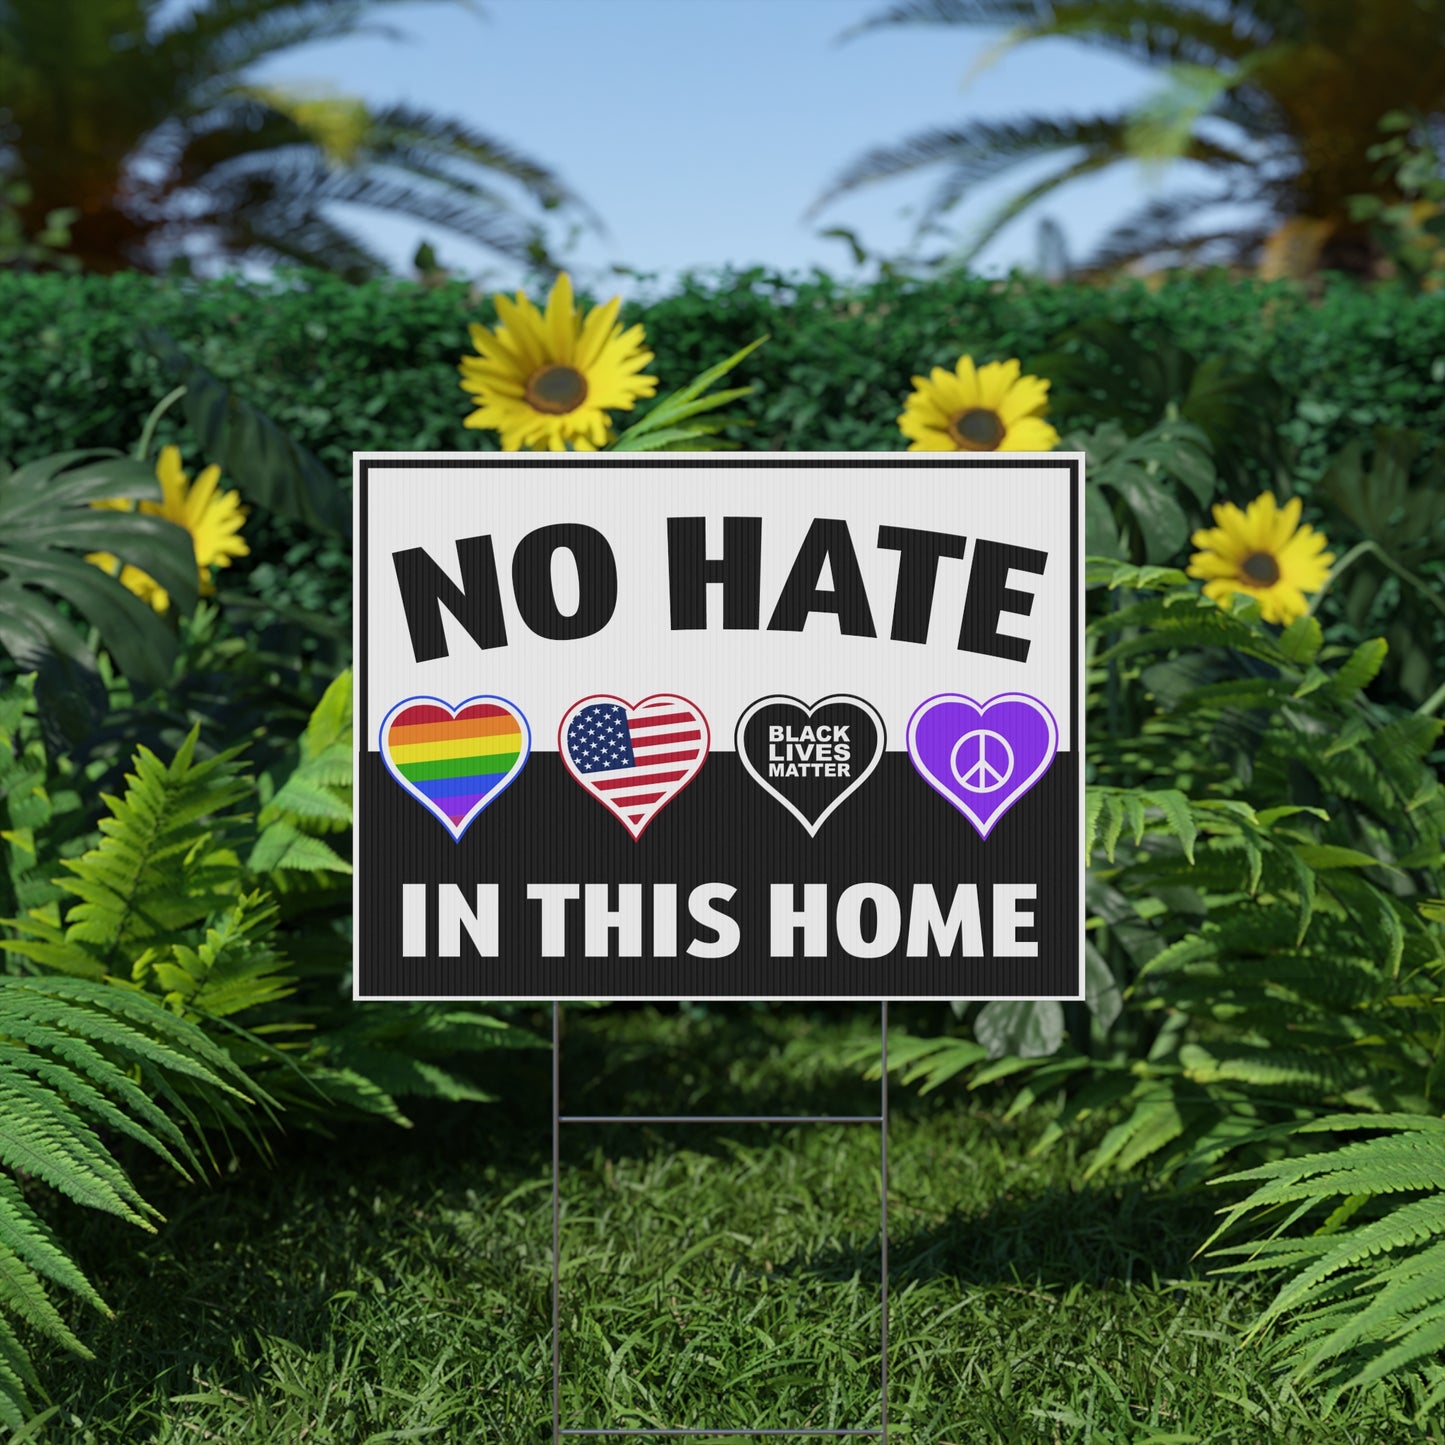 No Hate in This Home, Hate Has no Home Here, Yard Sign, Printed 2-Sided, 12x18, 24x18 or 36x24, Metal H-Stake Included, v1